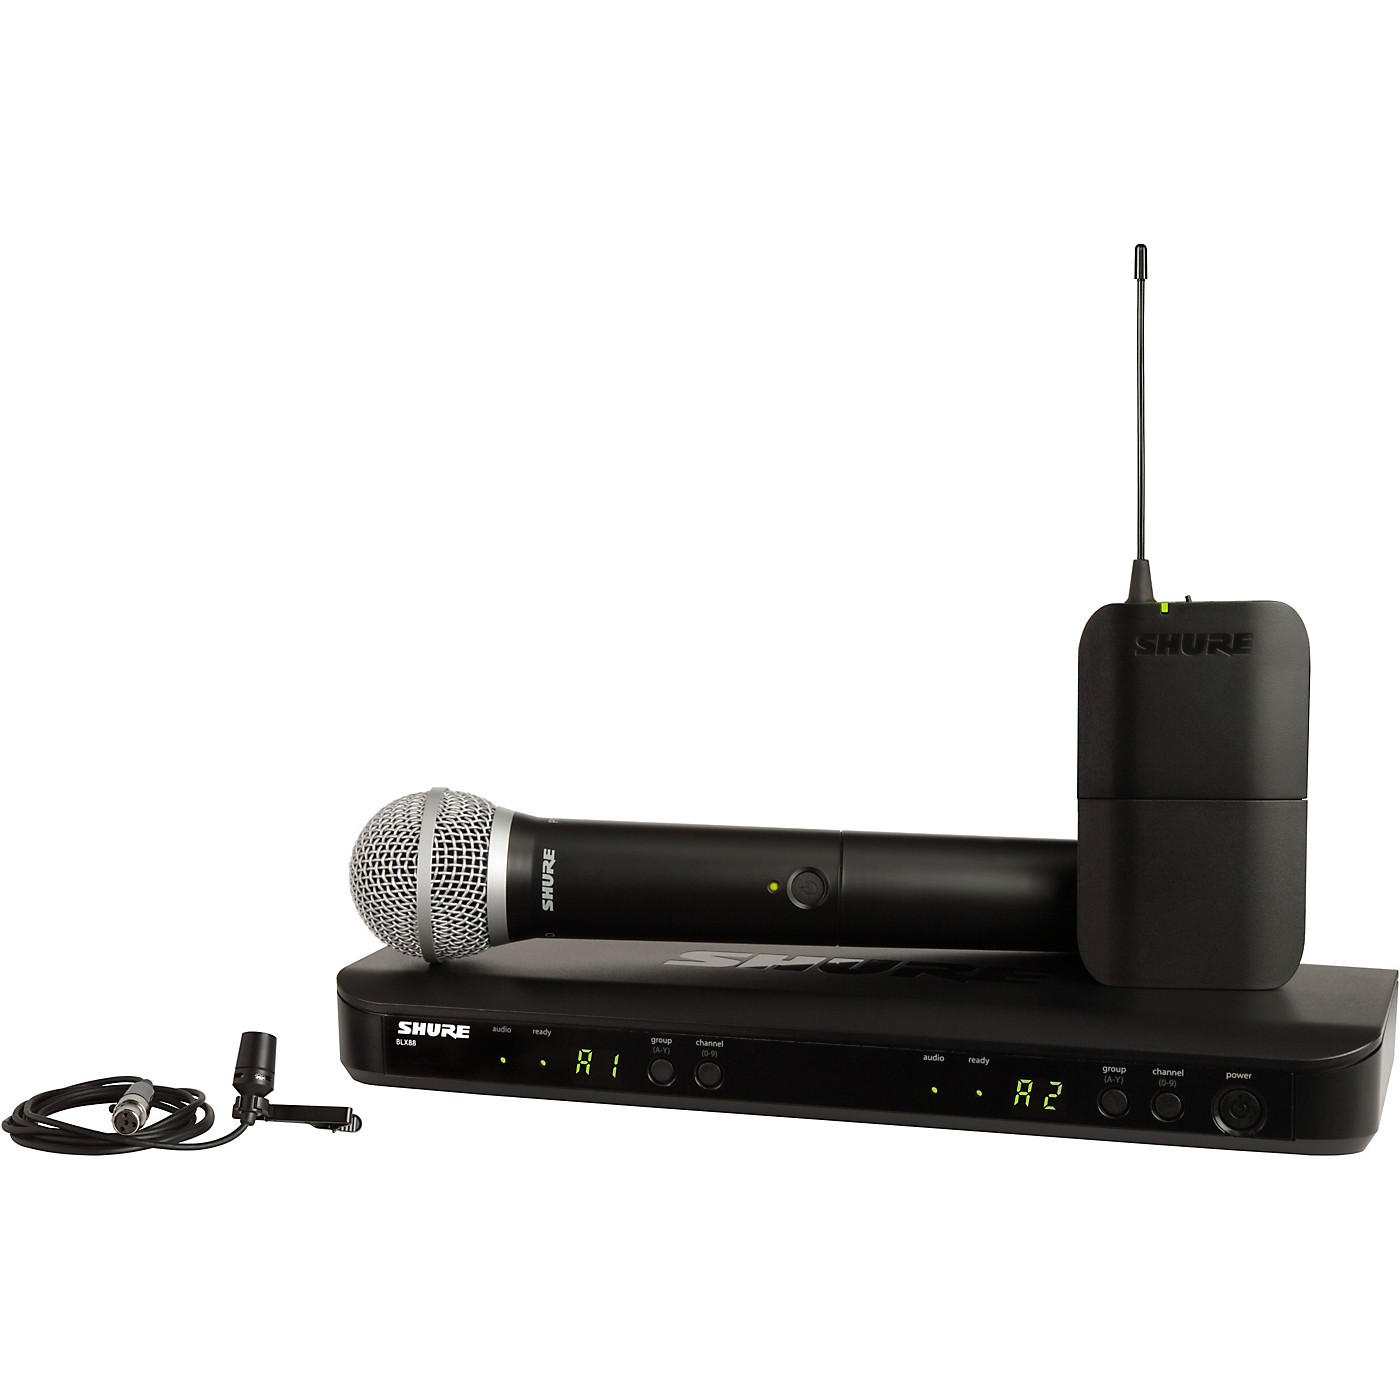 Shure BLX1288 Combo System With CVL Lavalier Microphone and PG58 Handheld Microphone thumbnail